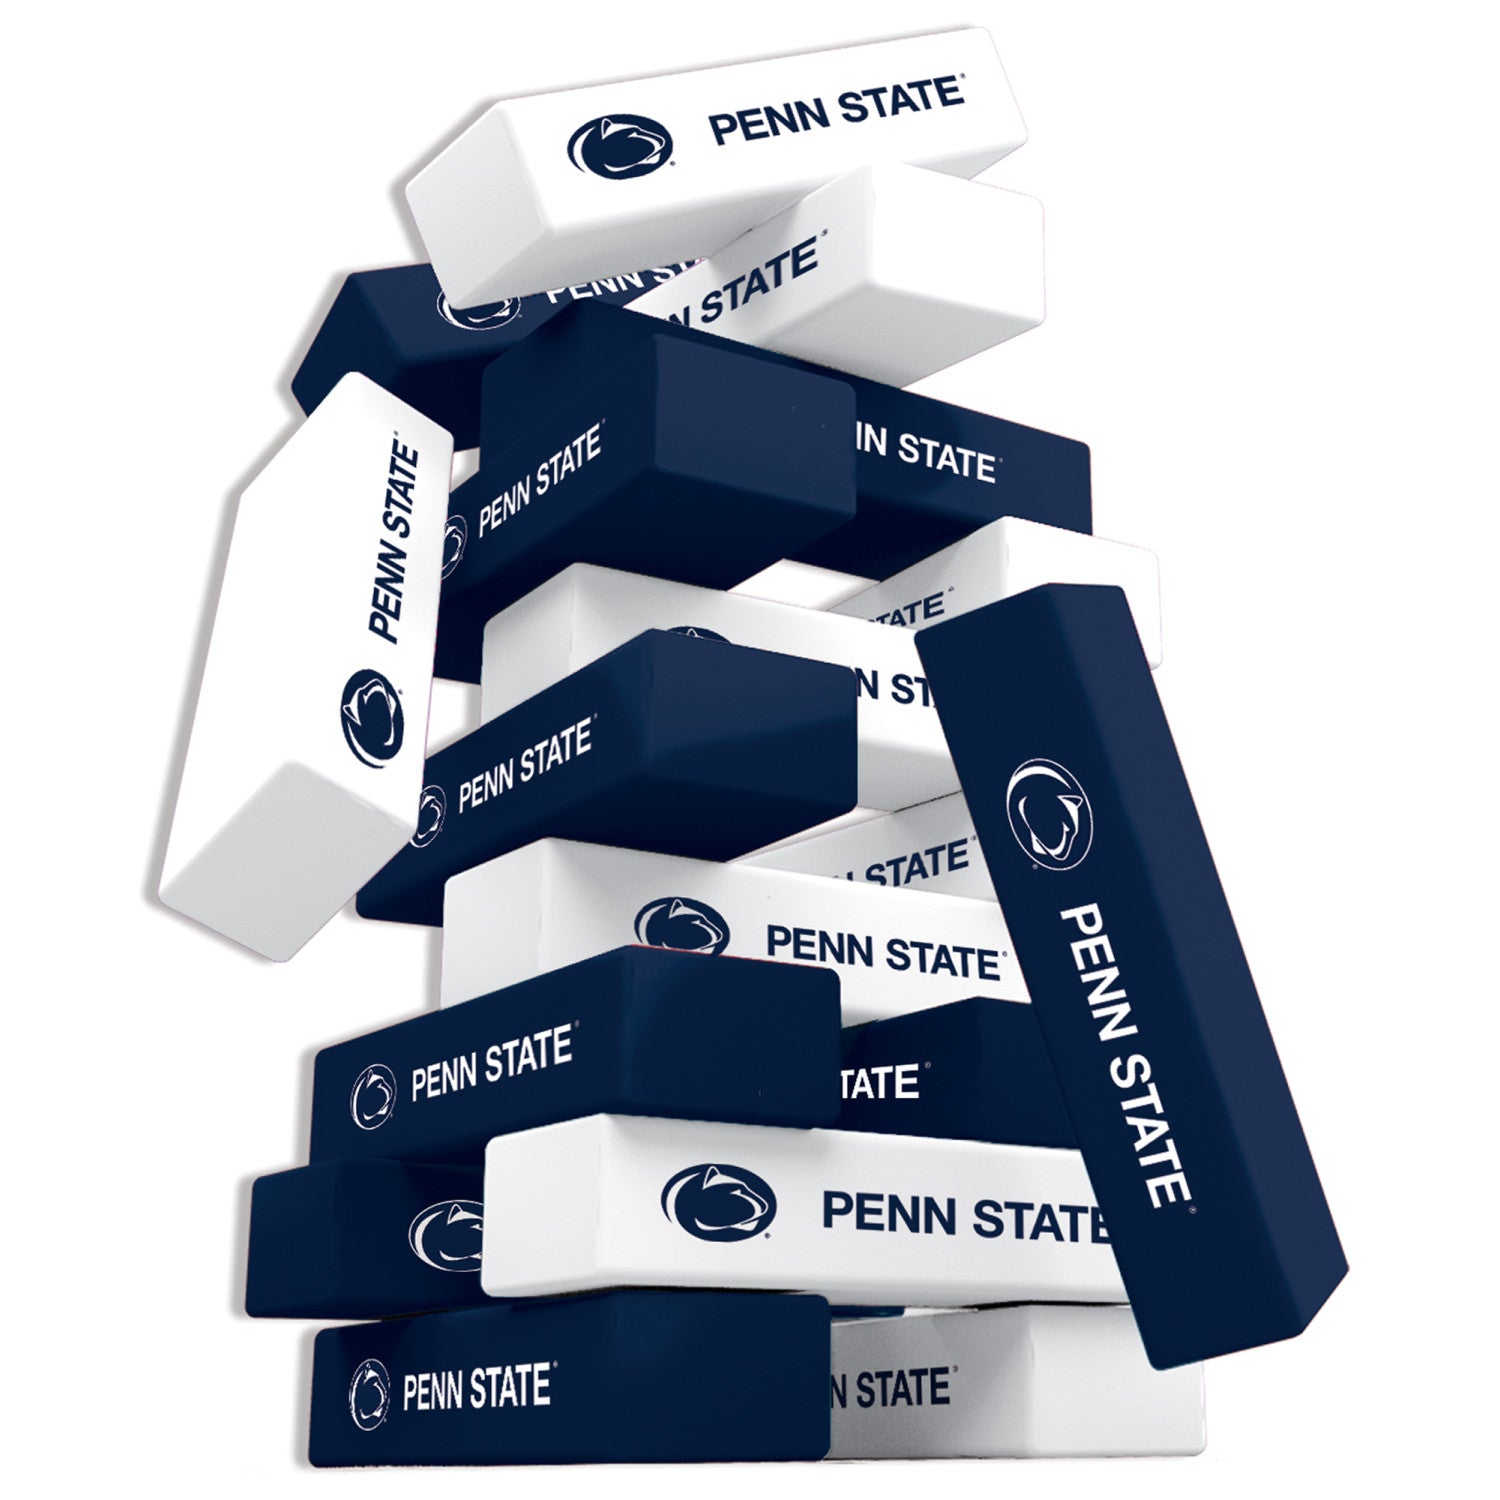 Penn State Nittany Lions Tumble Tower